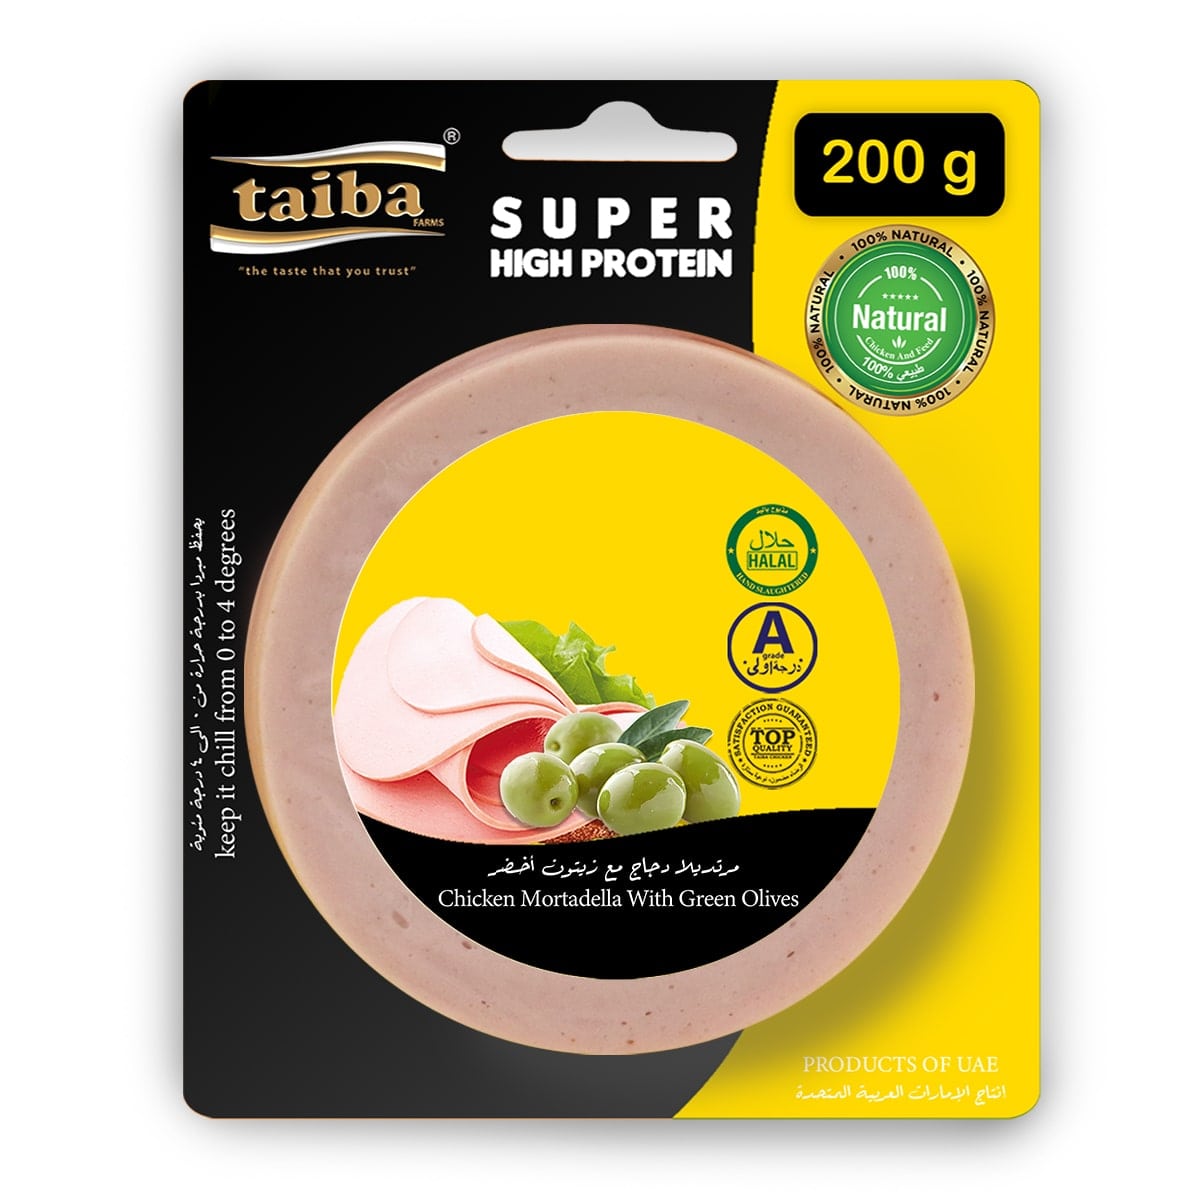 chicken-Mortadella-with-Green-Olive-200g